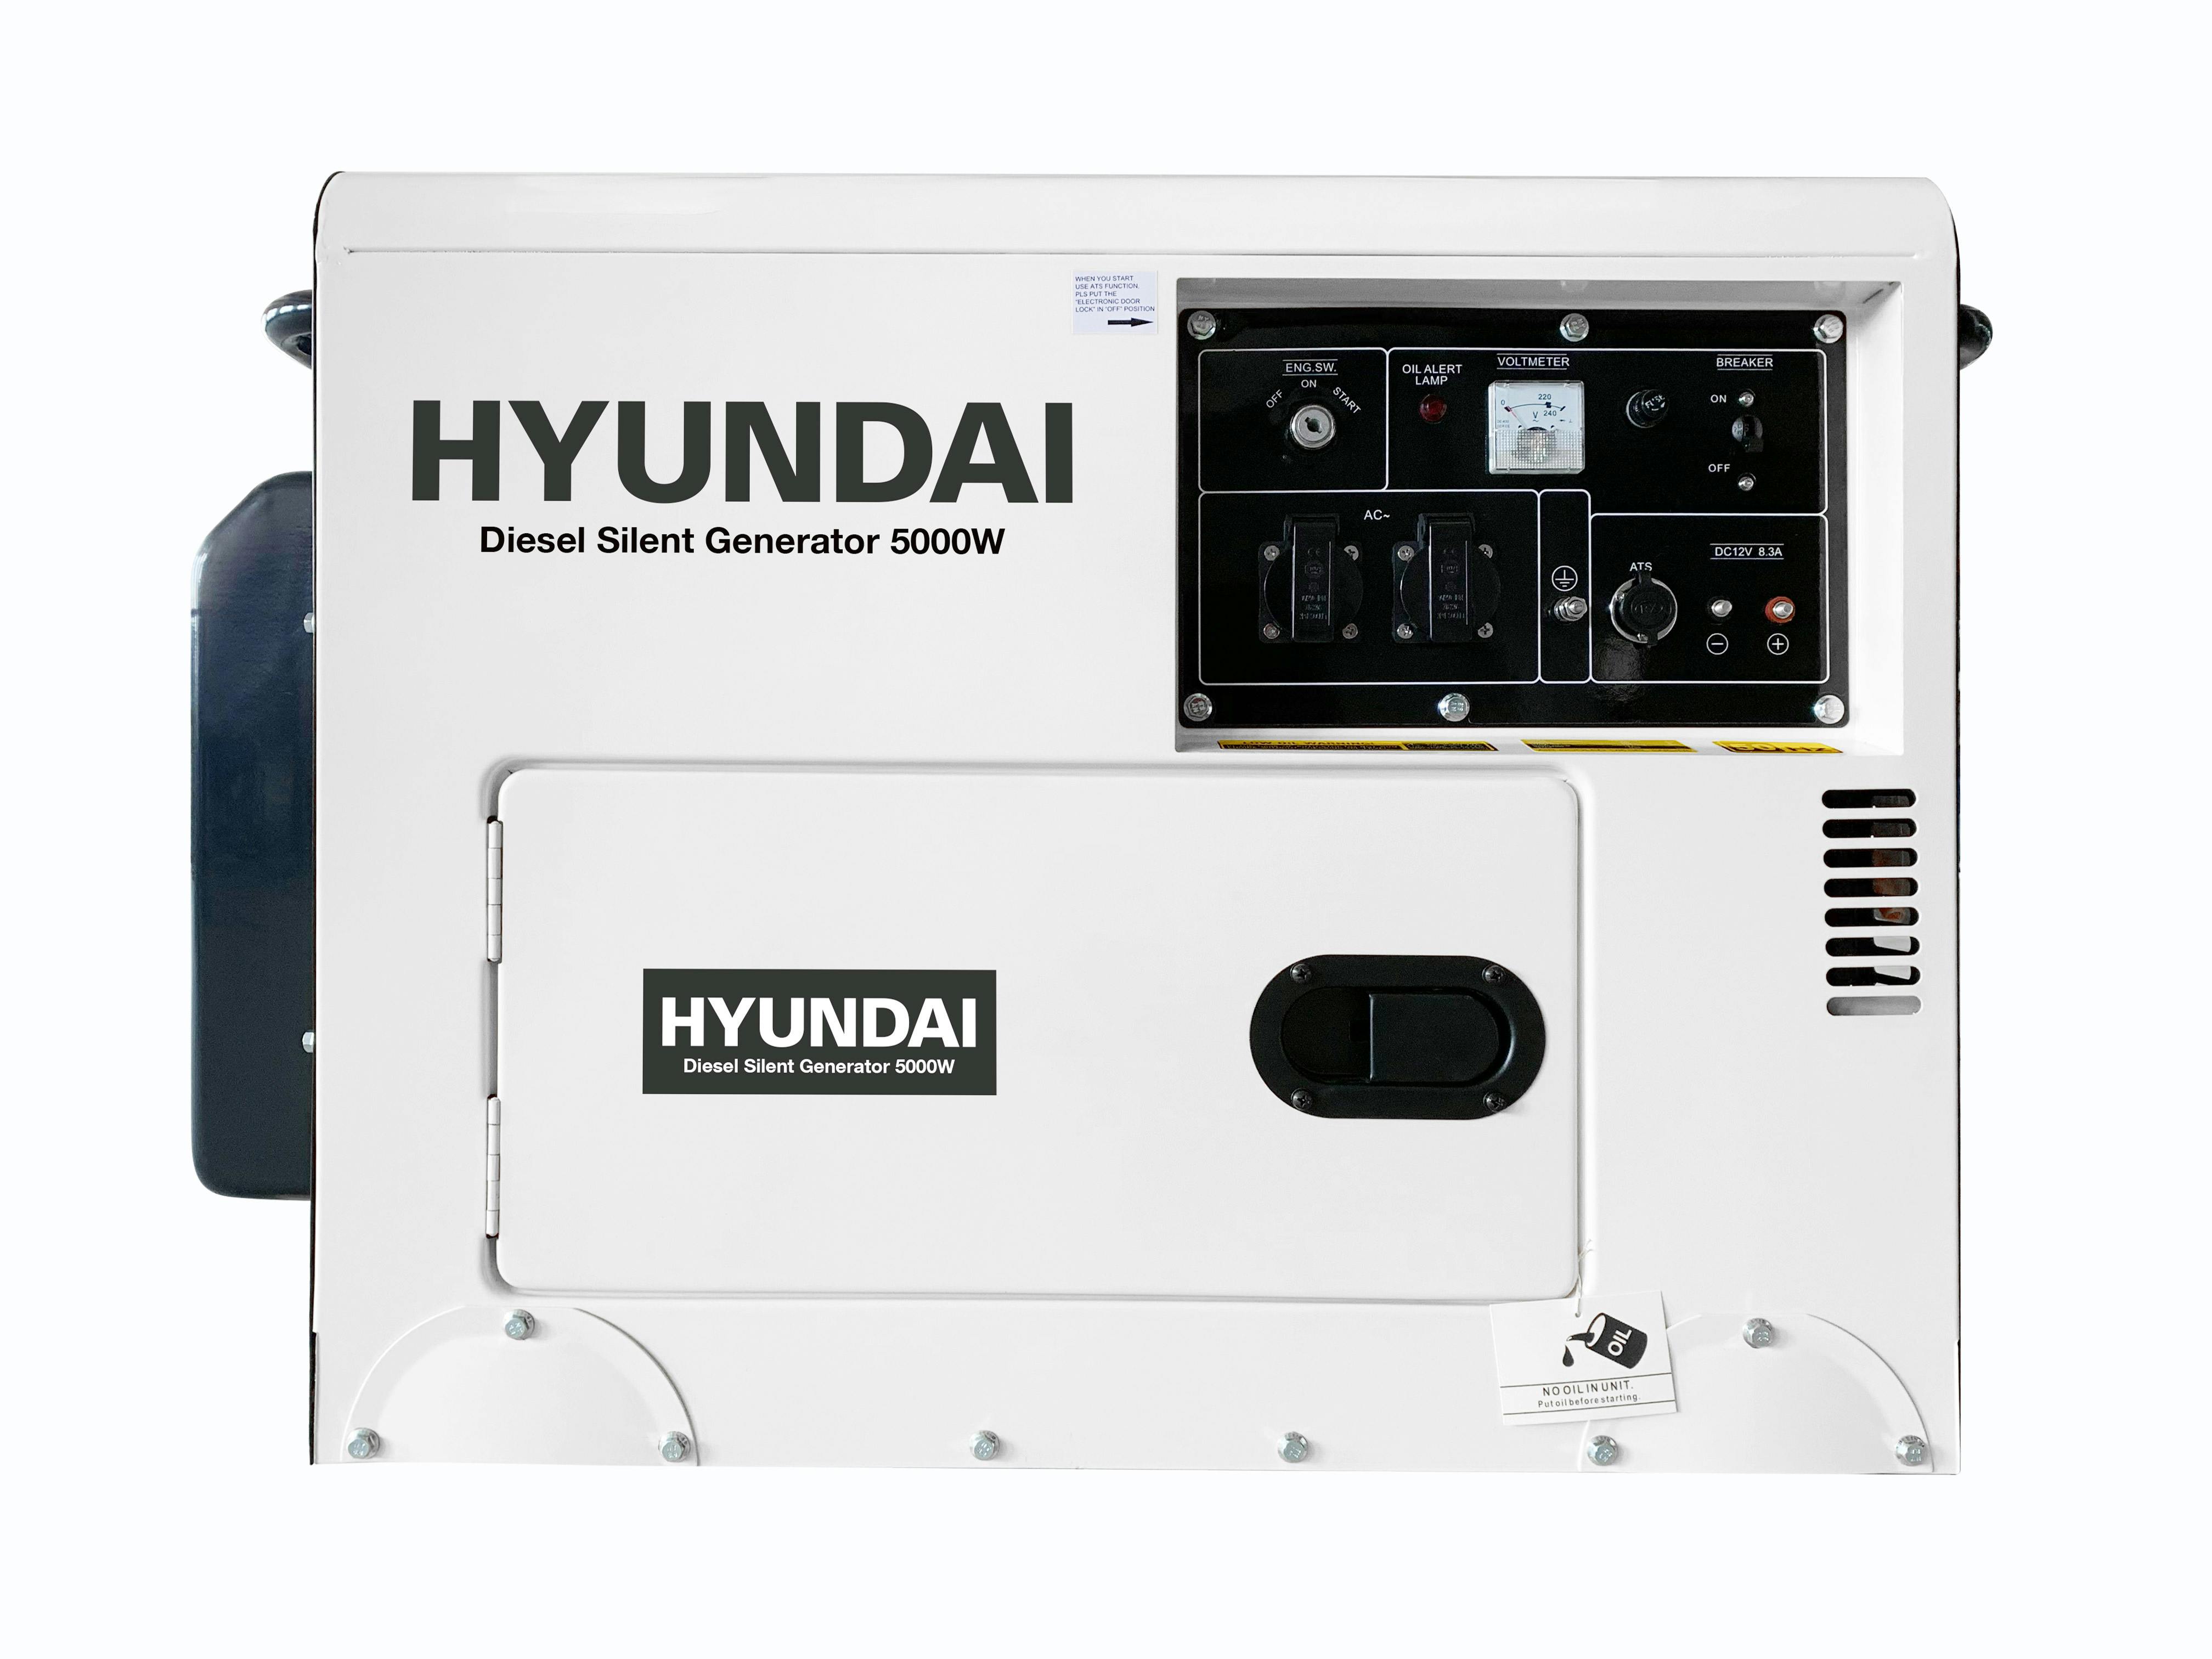 forfremmelse Jolly holdall Hyundai Diesel Silenced Generator 5000W - Diesel - Traditional - Generators  - Tools & Hardware at Trade Tested